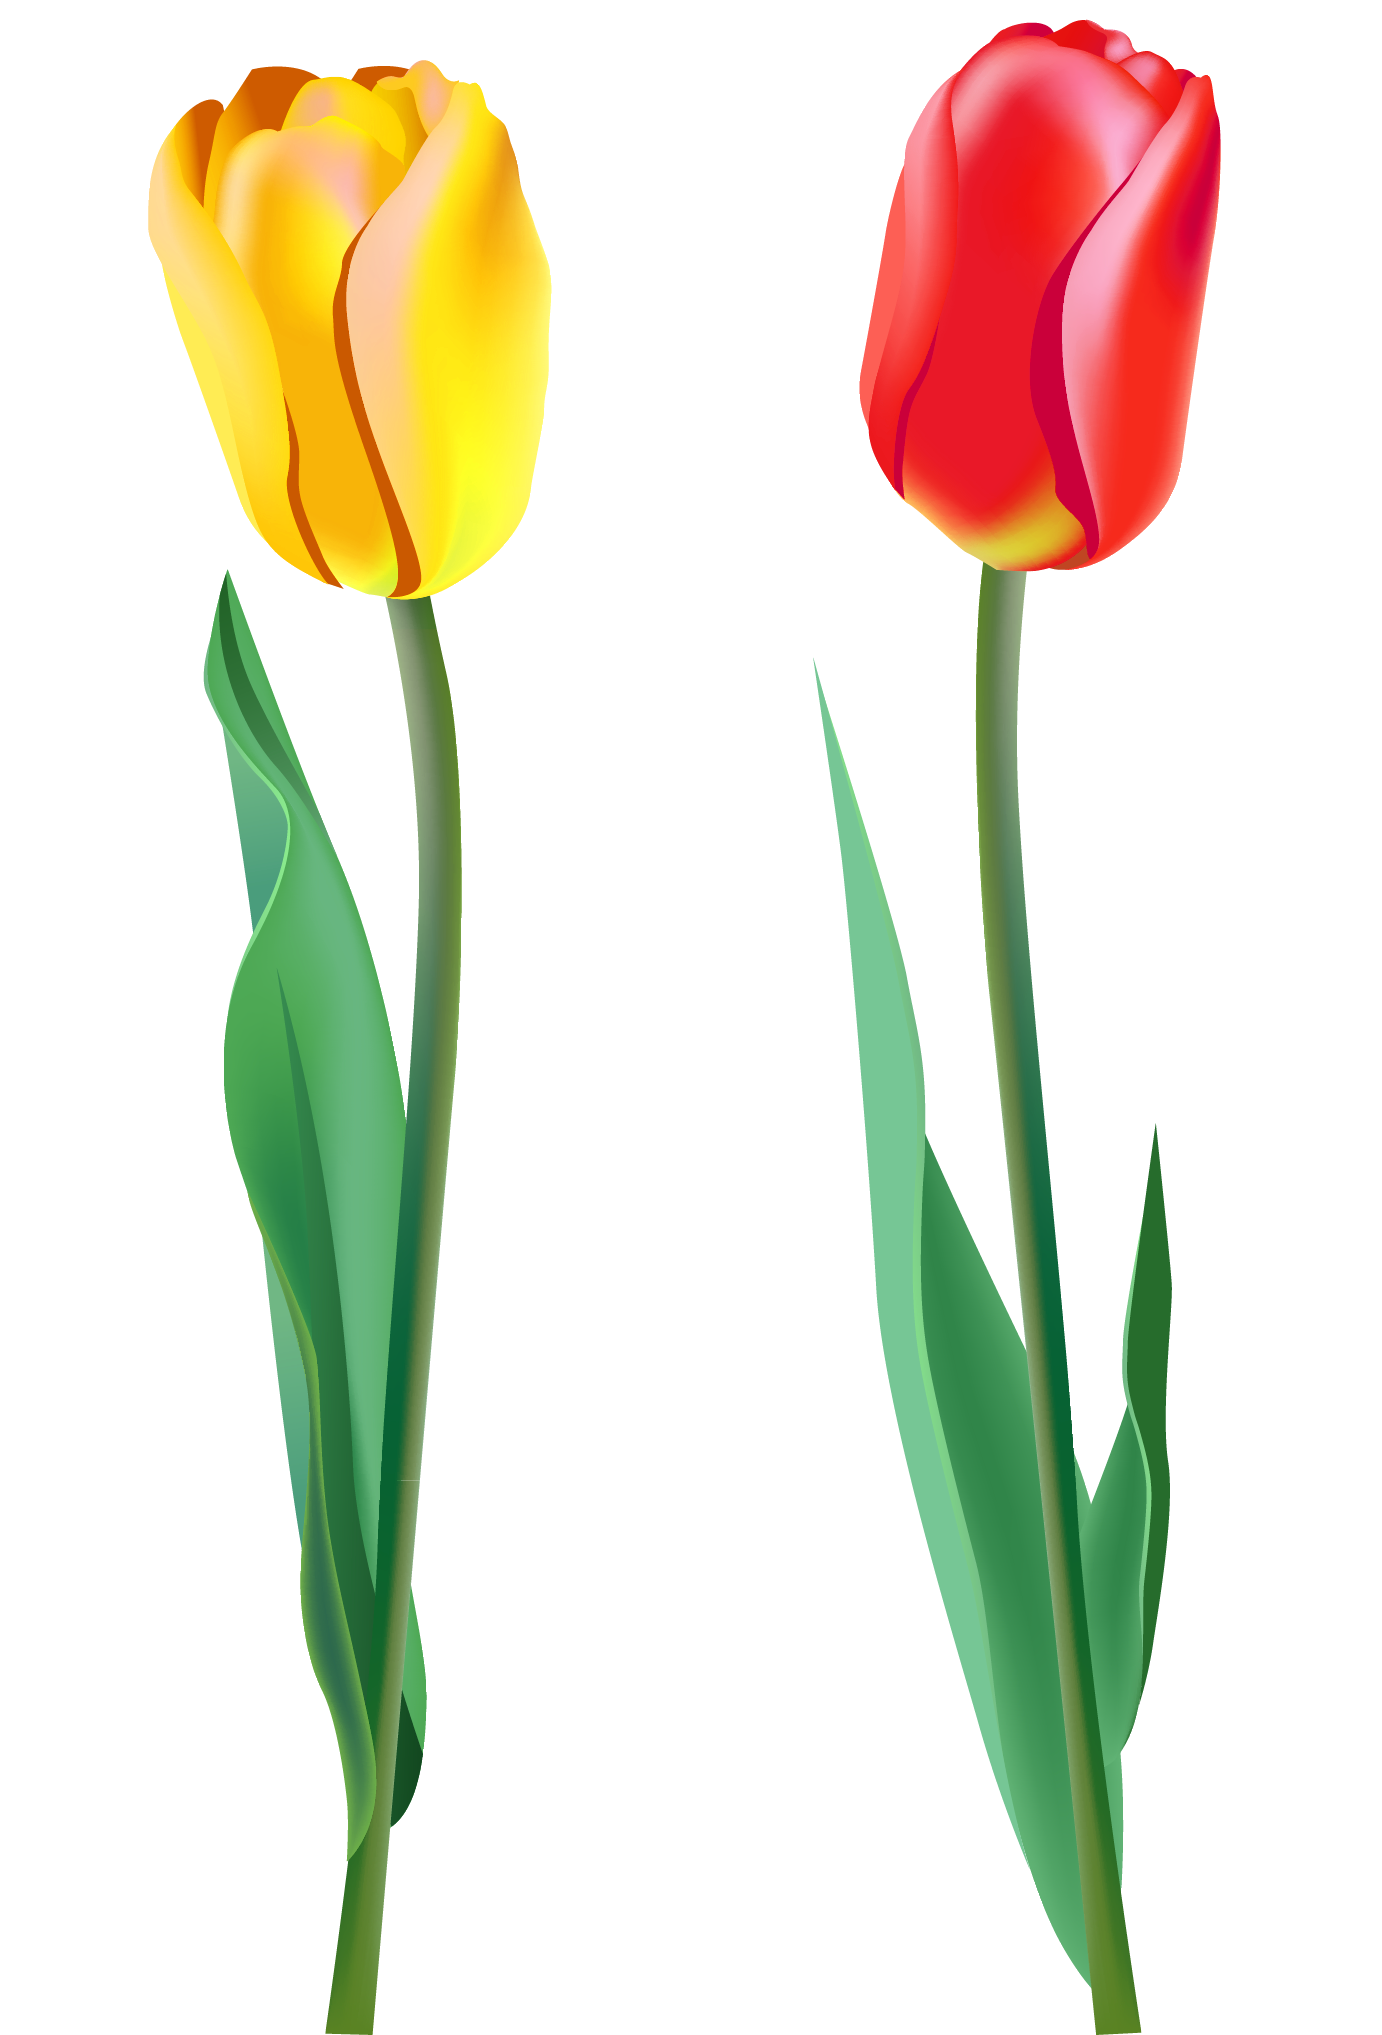 10 Spring Tulips Clip Art   Free Cliparts That You Can Download To You